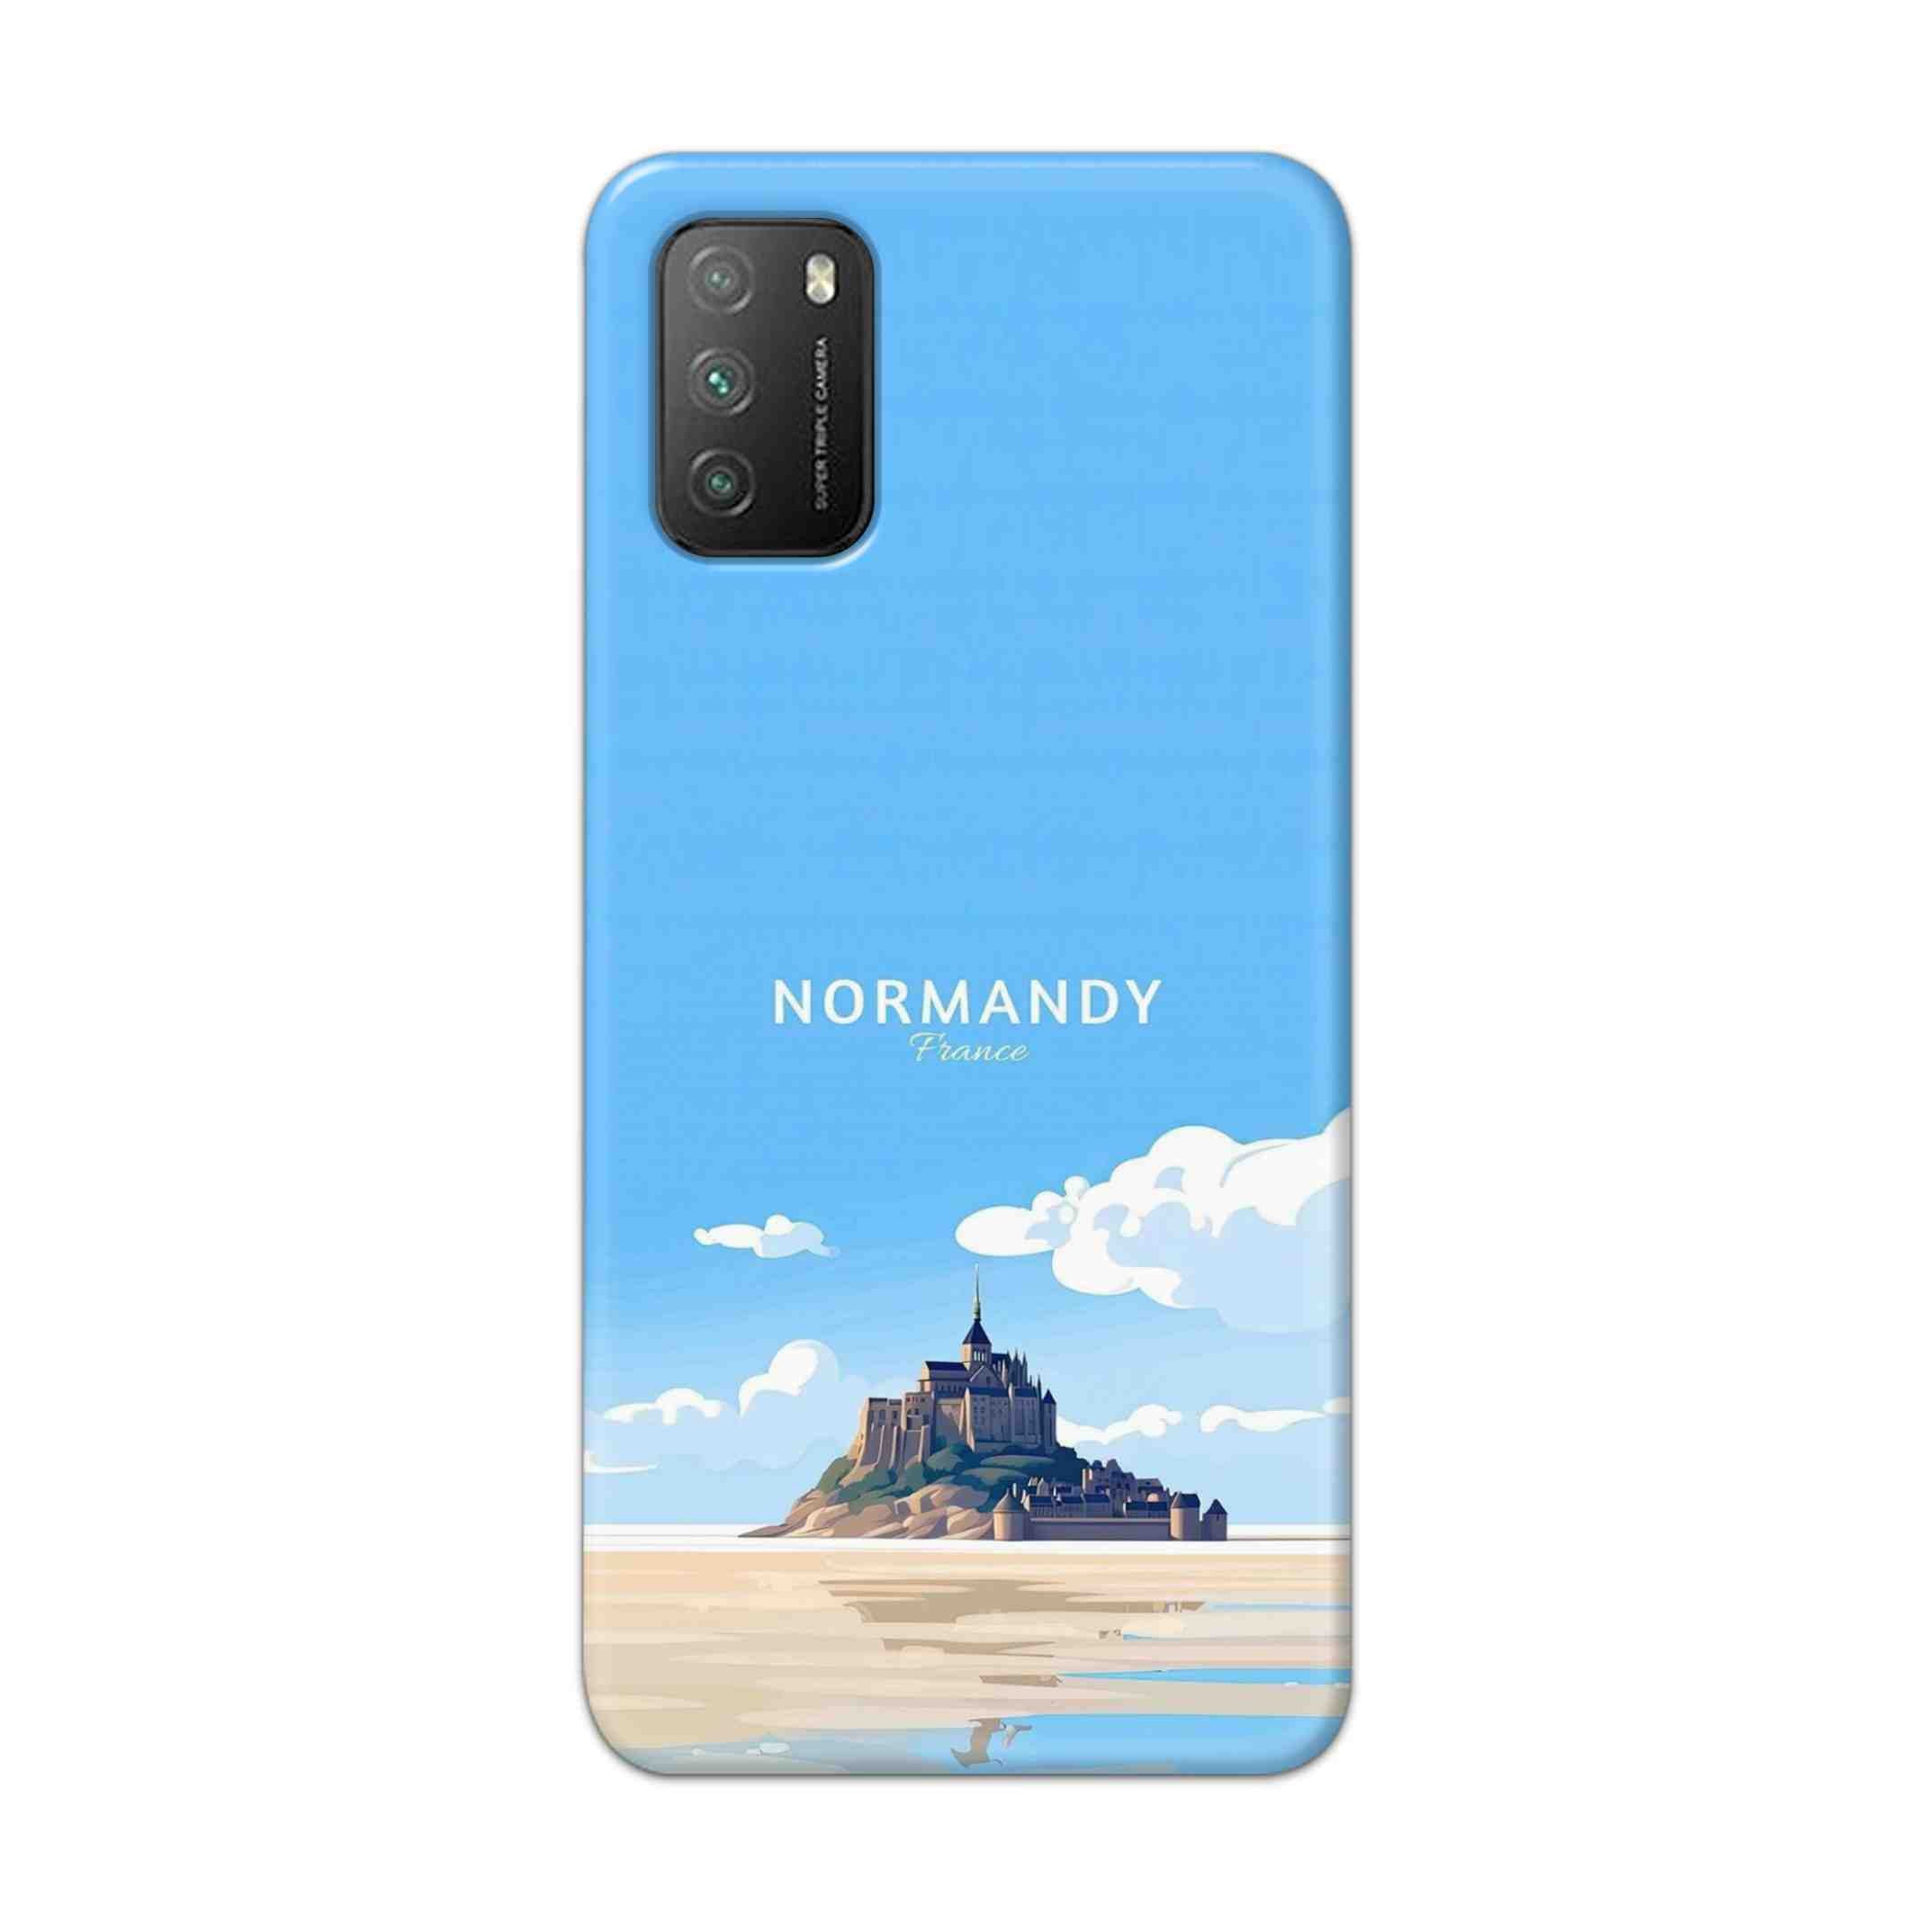 Buy Normandy Hard Back Mobile Phone Case Cover For Poco M3 Online